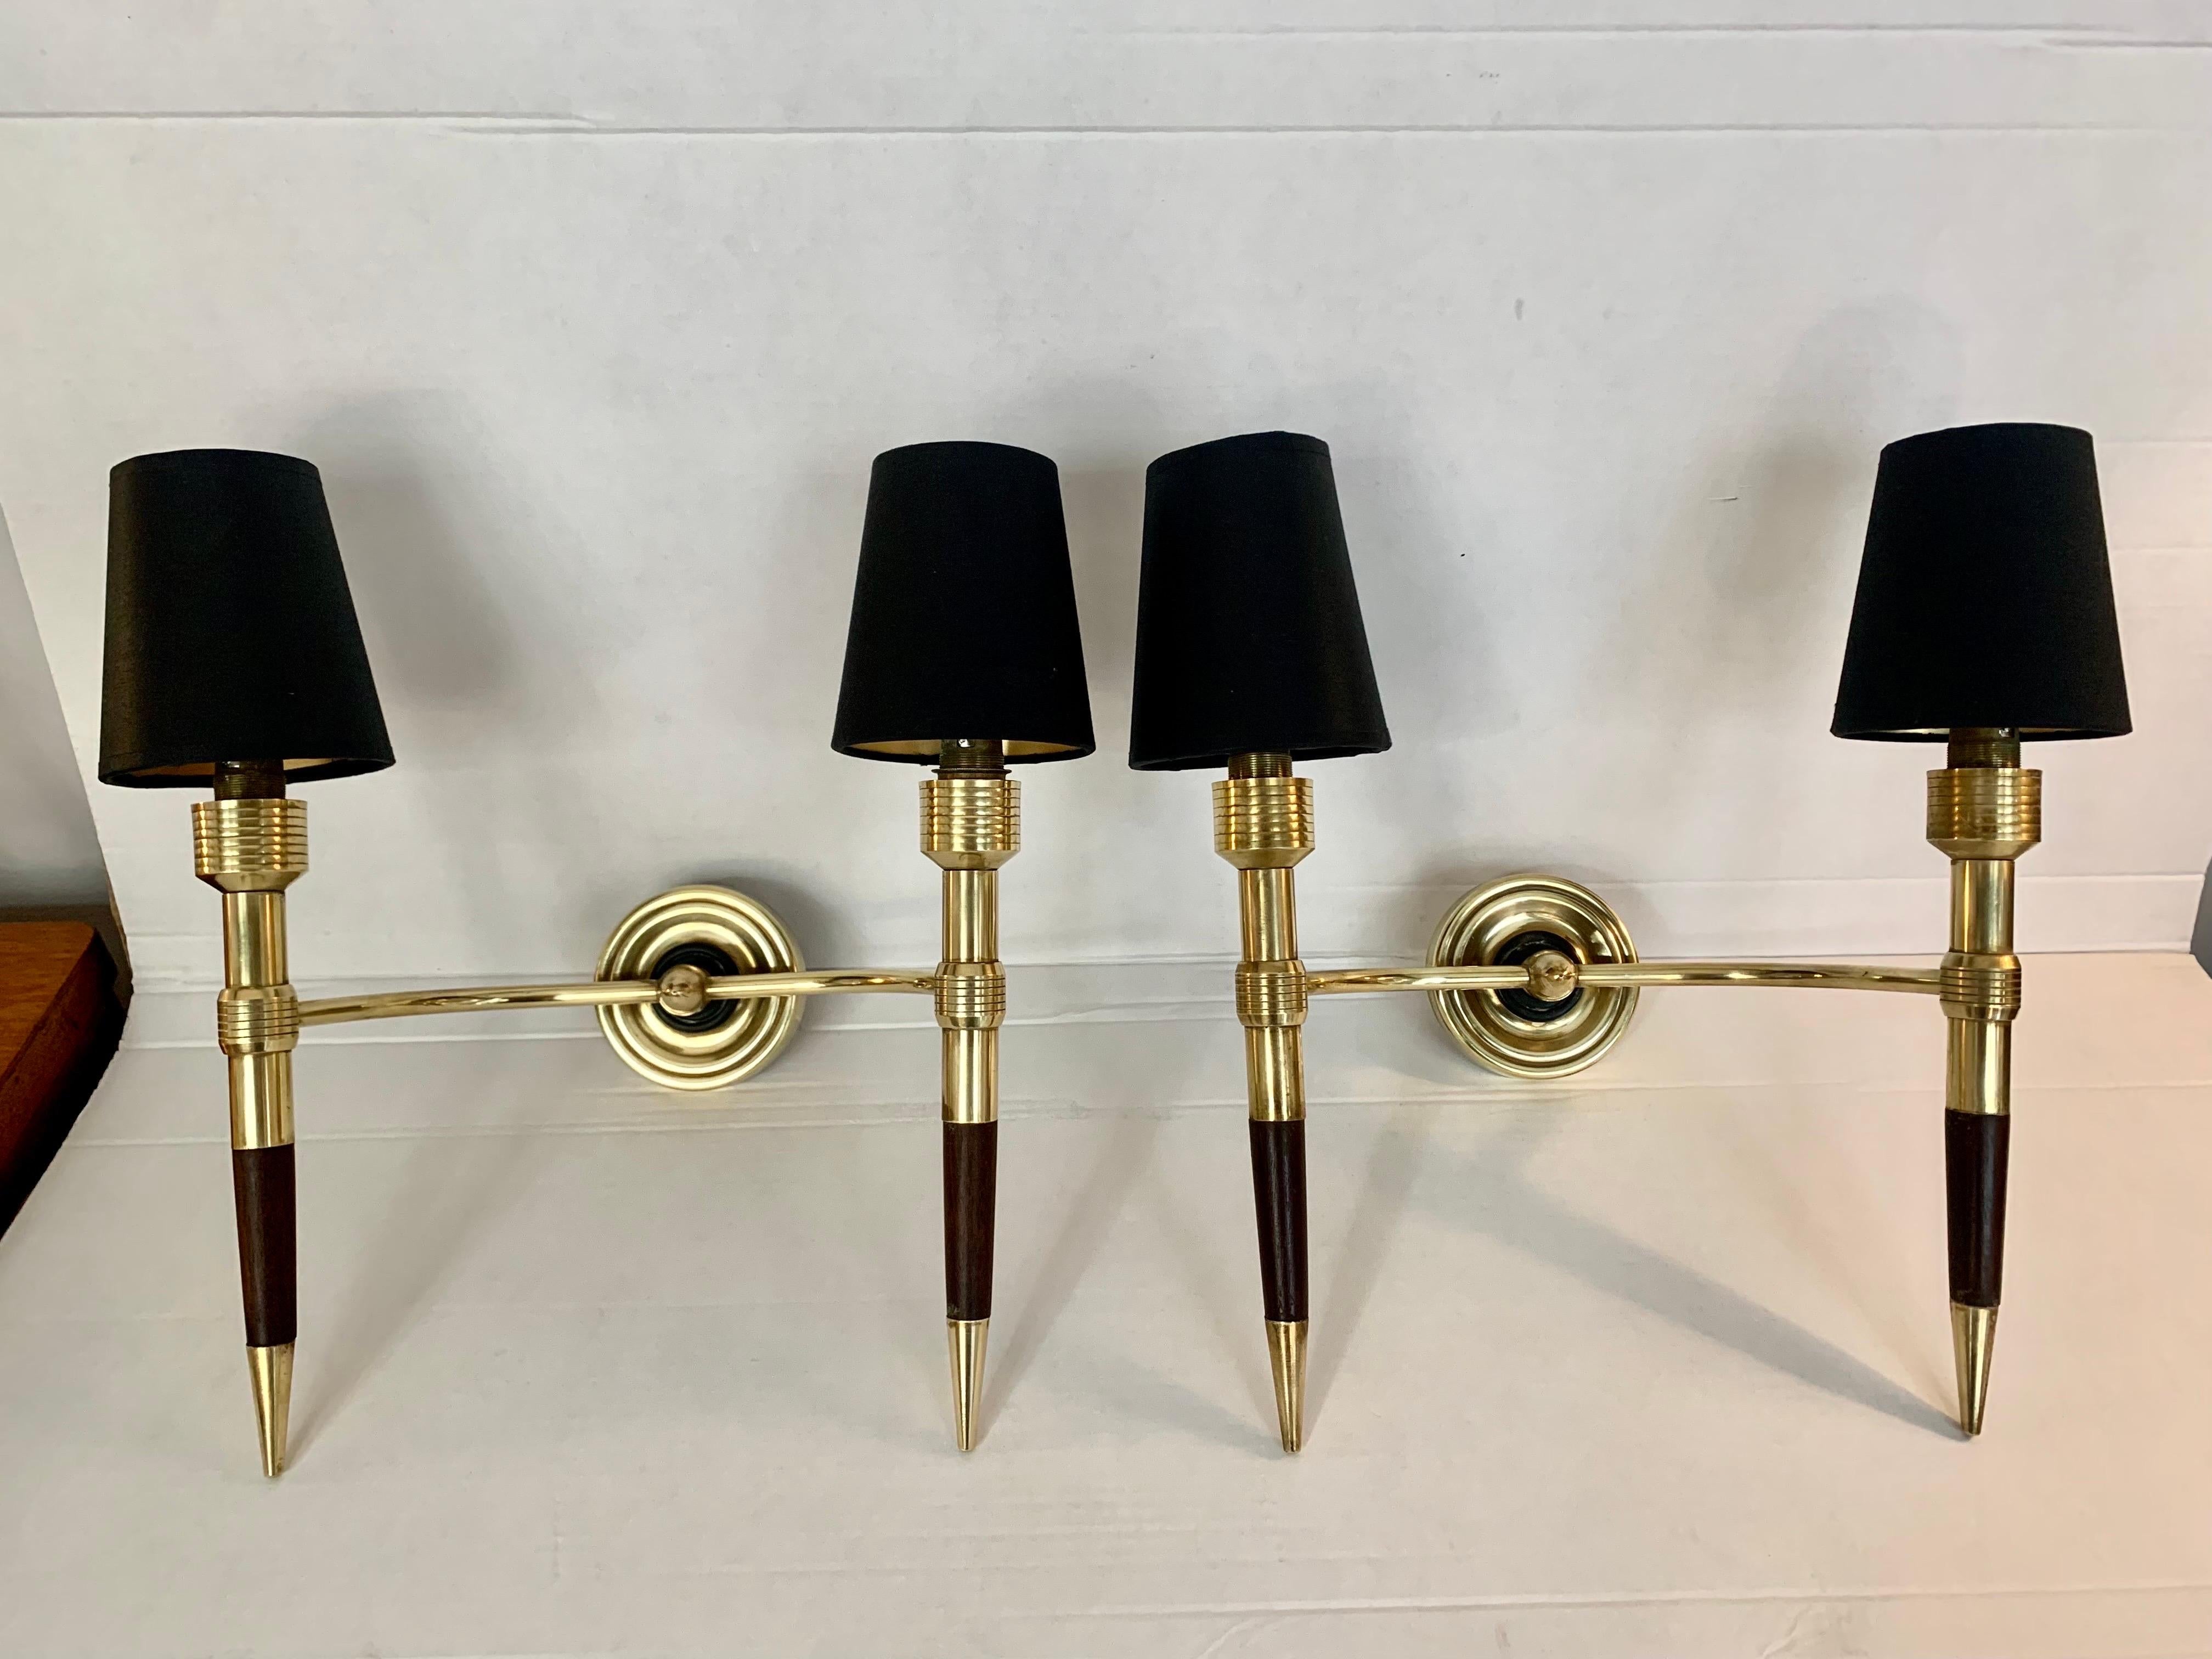 A pair of elegant French wall sconces, from Maison Lancel, in golden brass and lacquered wood, double light and black and golden interior shades, proven and renovated operation.